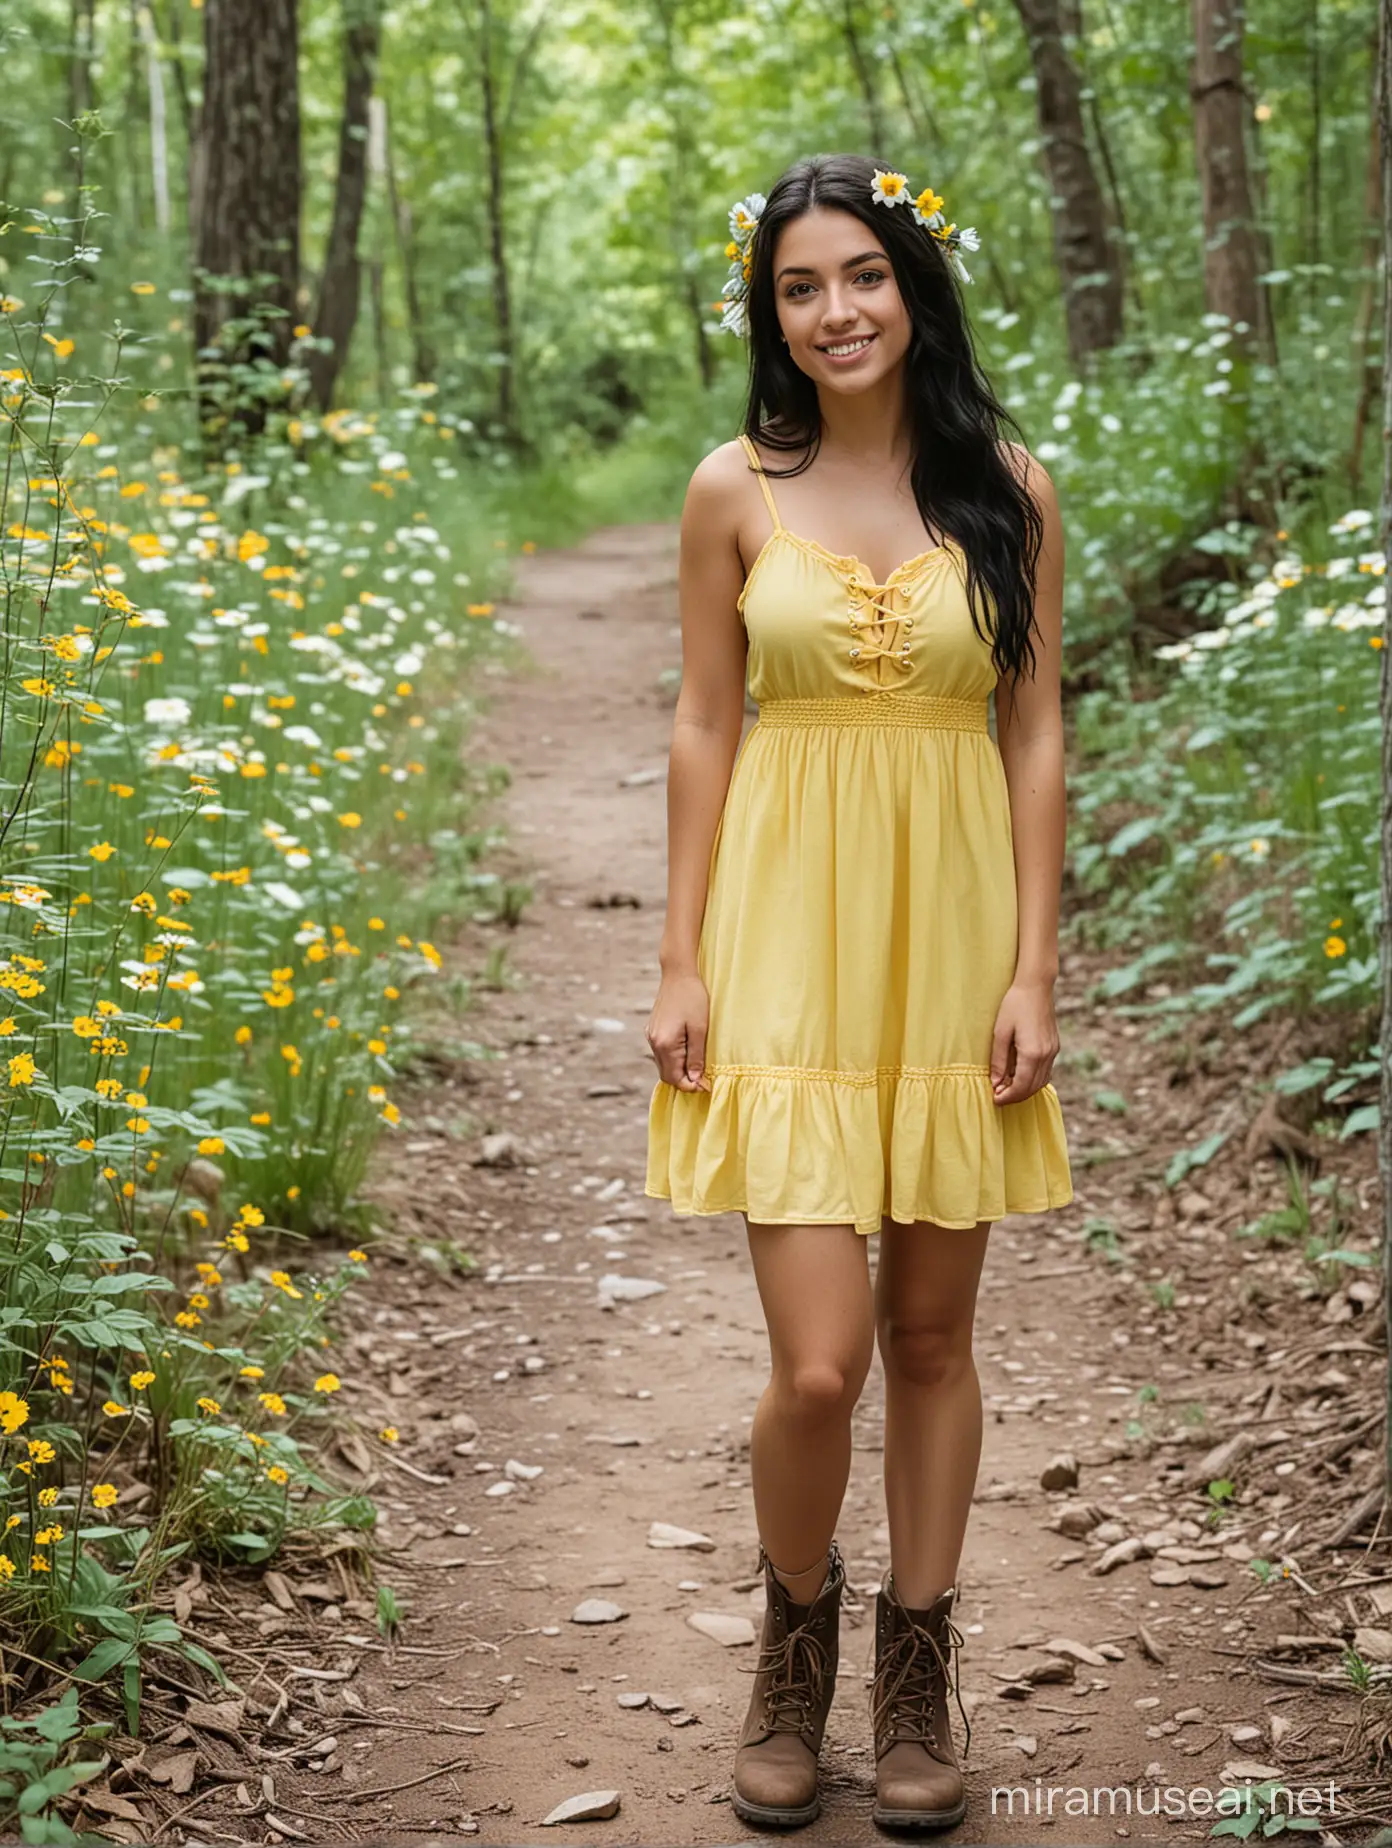 short girl with long black hair and hazel eyes, wearing a short light yellow sundress, flowers in her hair, wearing hiking boots, standing on a forest trail, 